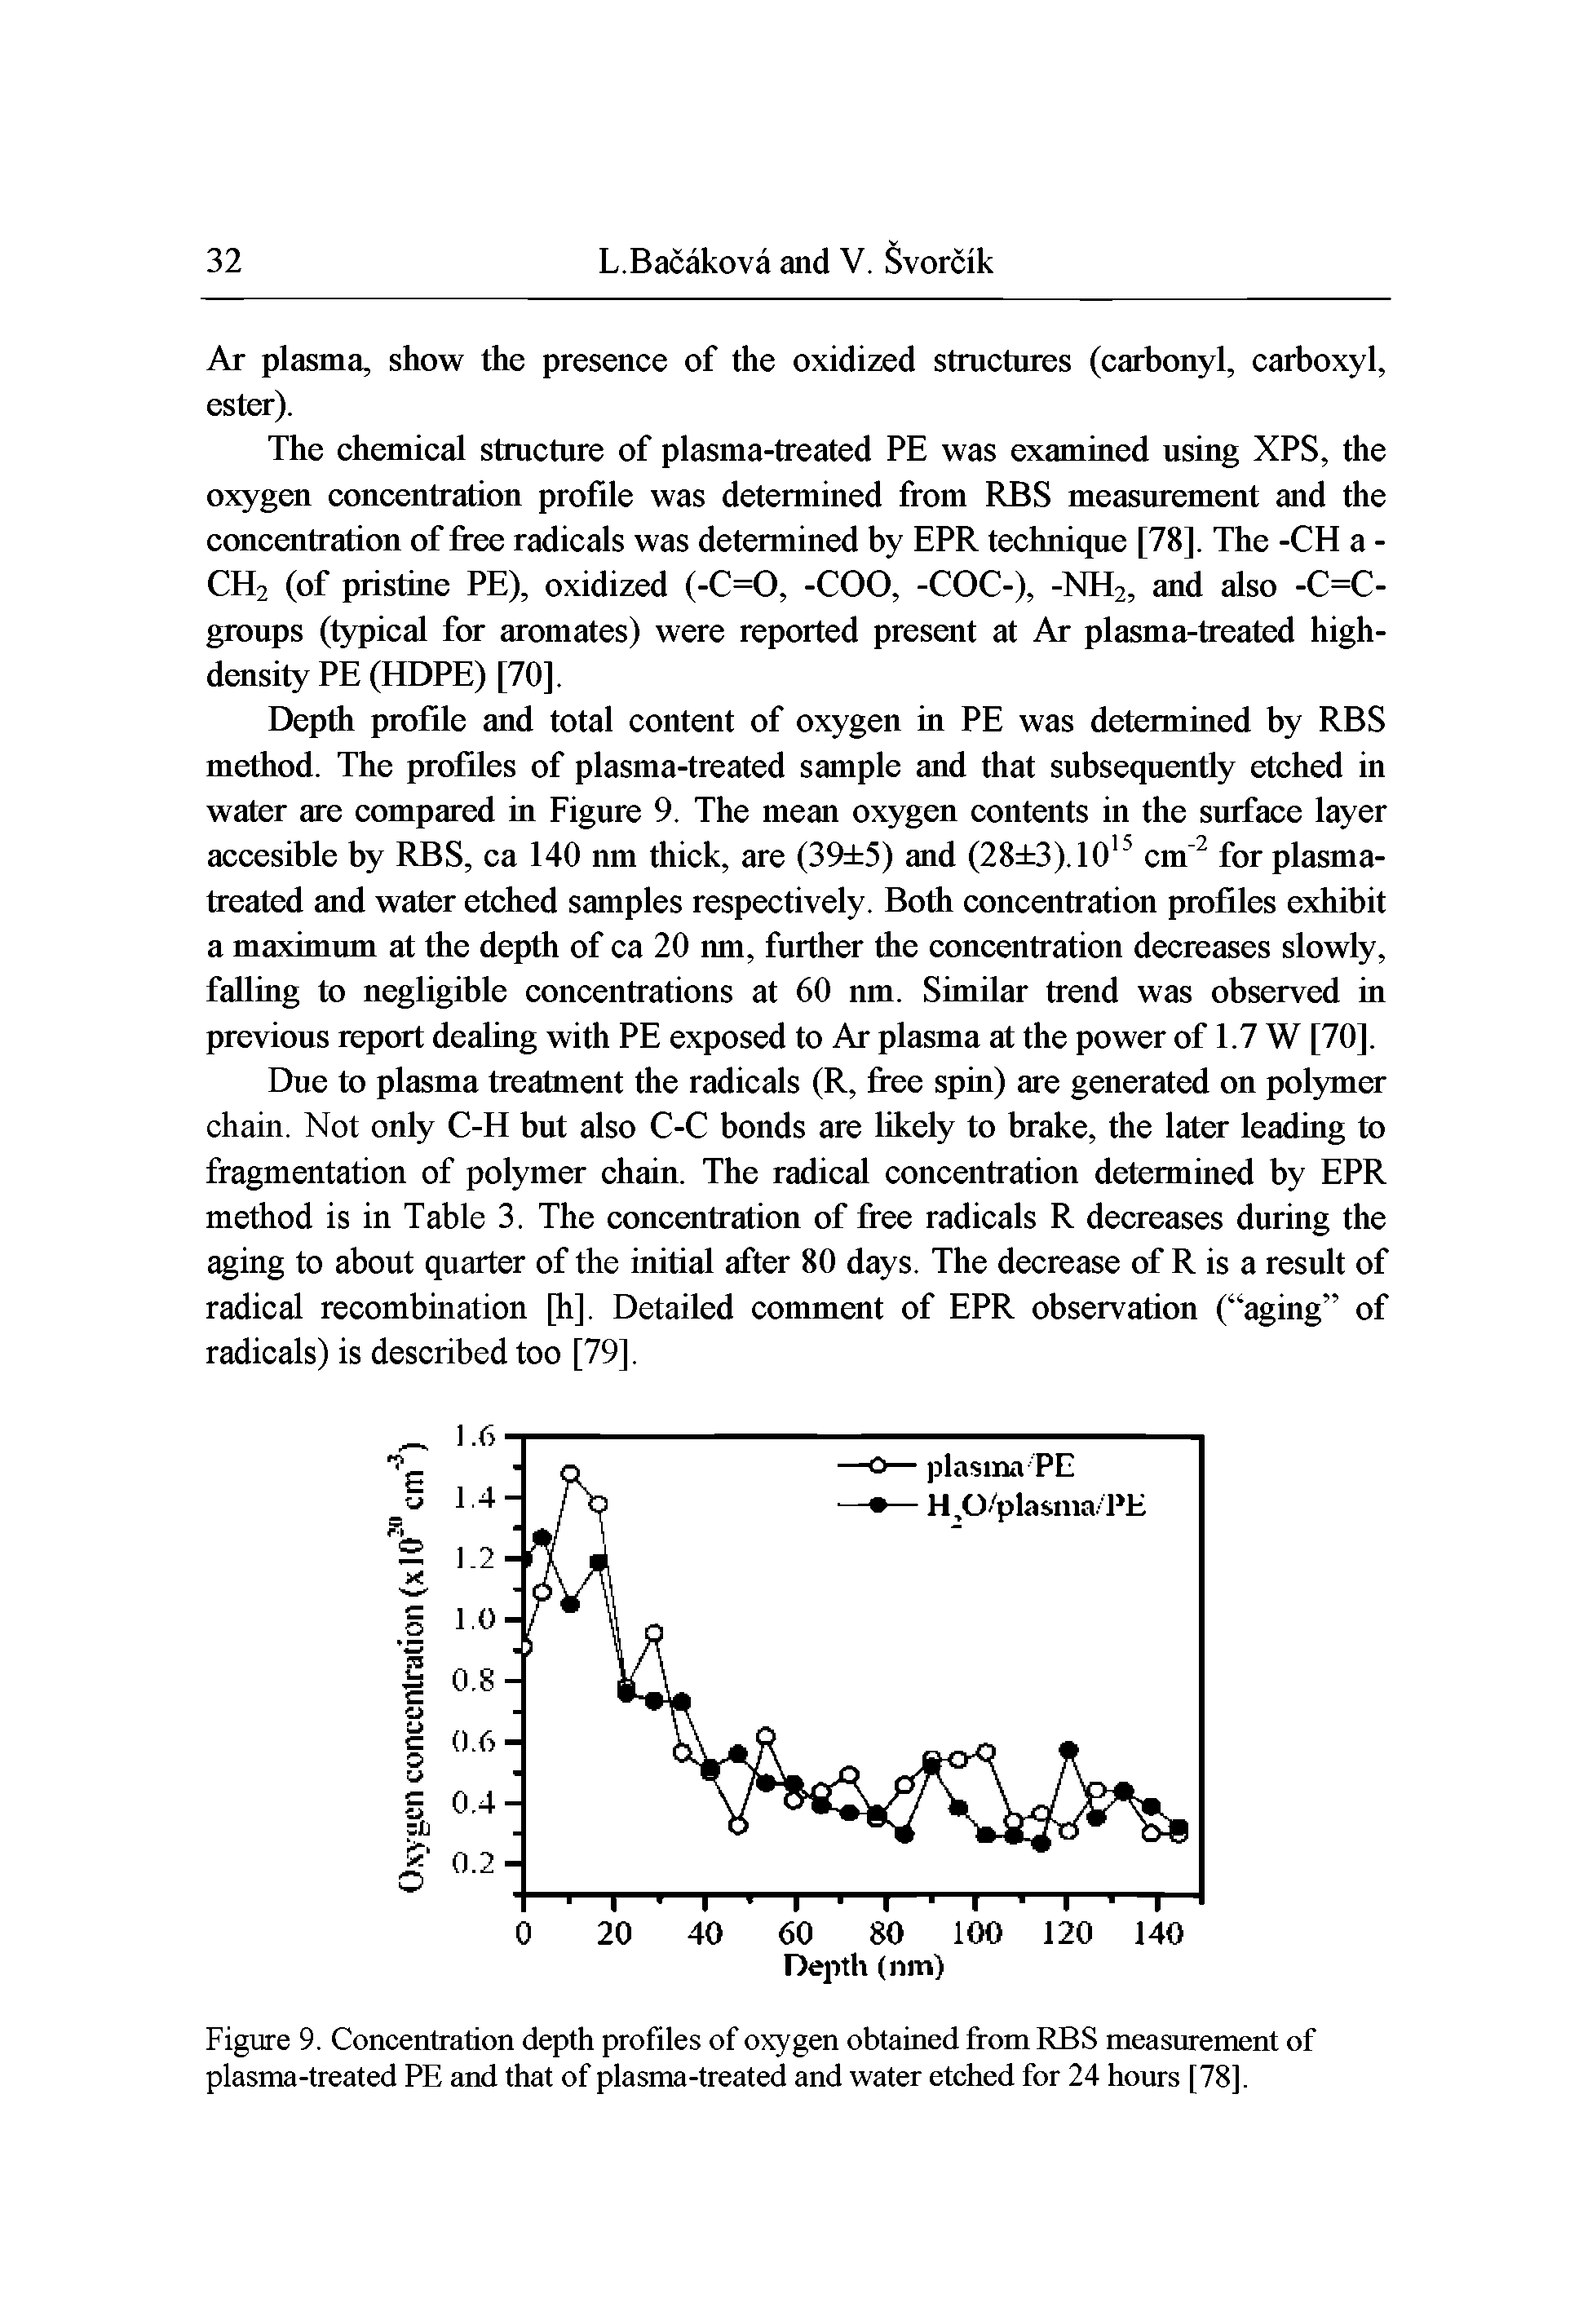 Figure 9. Concentration depth profiles of oxygen obtained from RBS measurement of plasma-treated PE and that of plasma-treated and water etched for 24 hours [78].